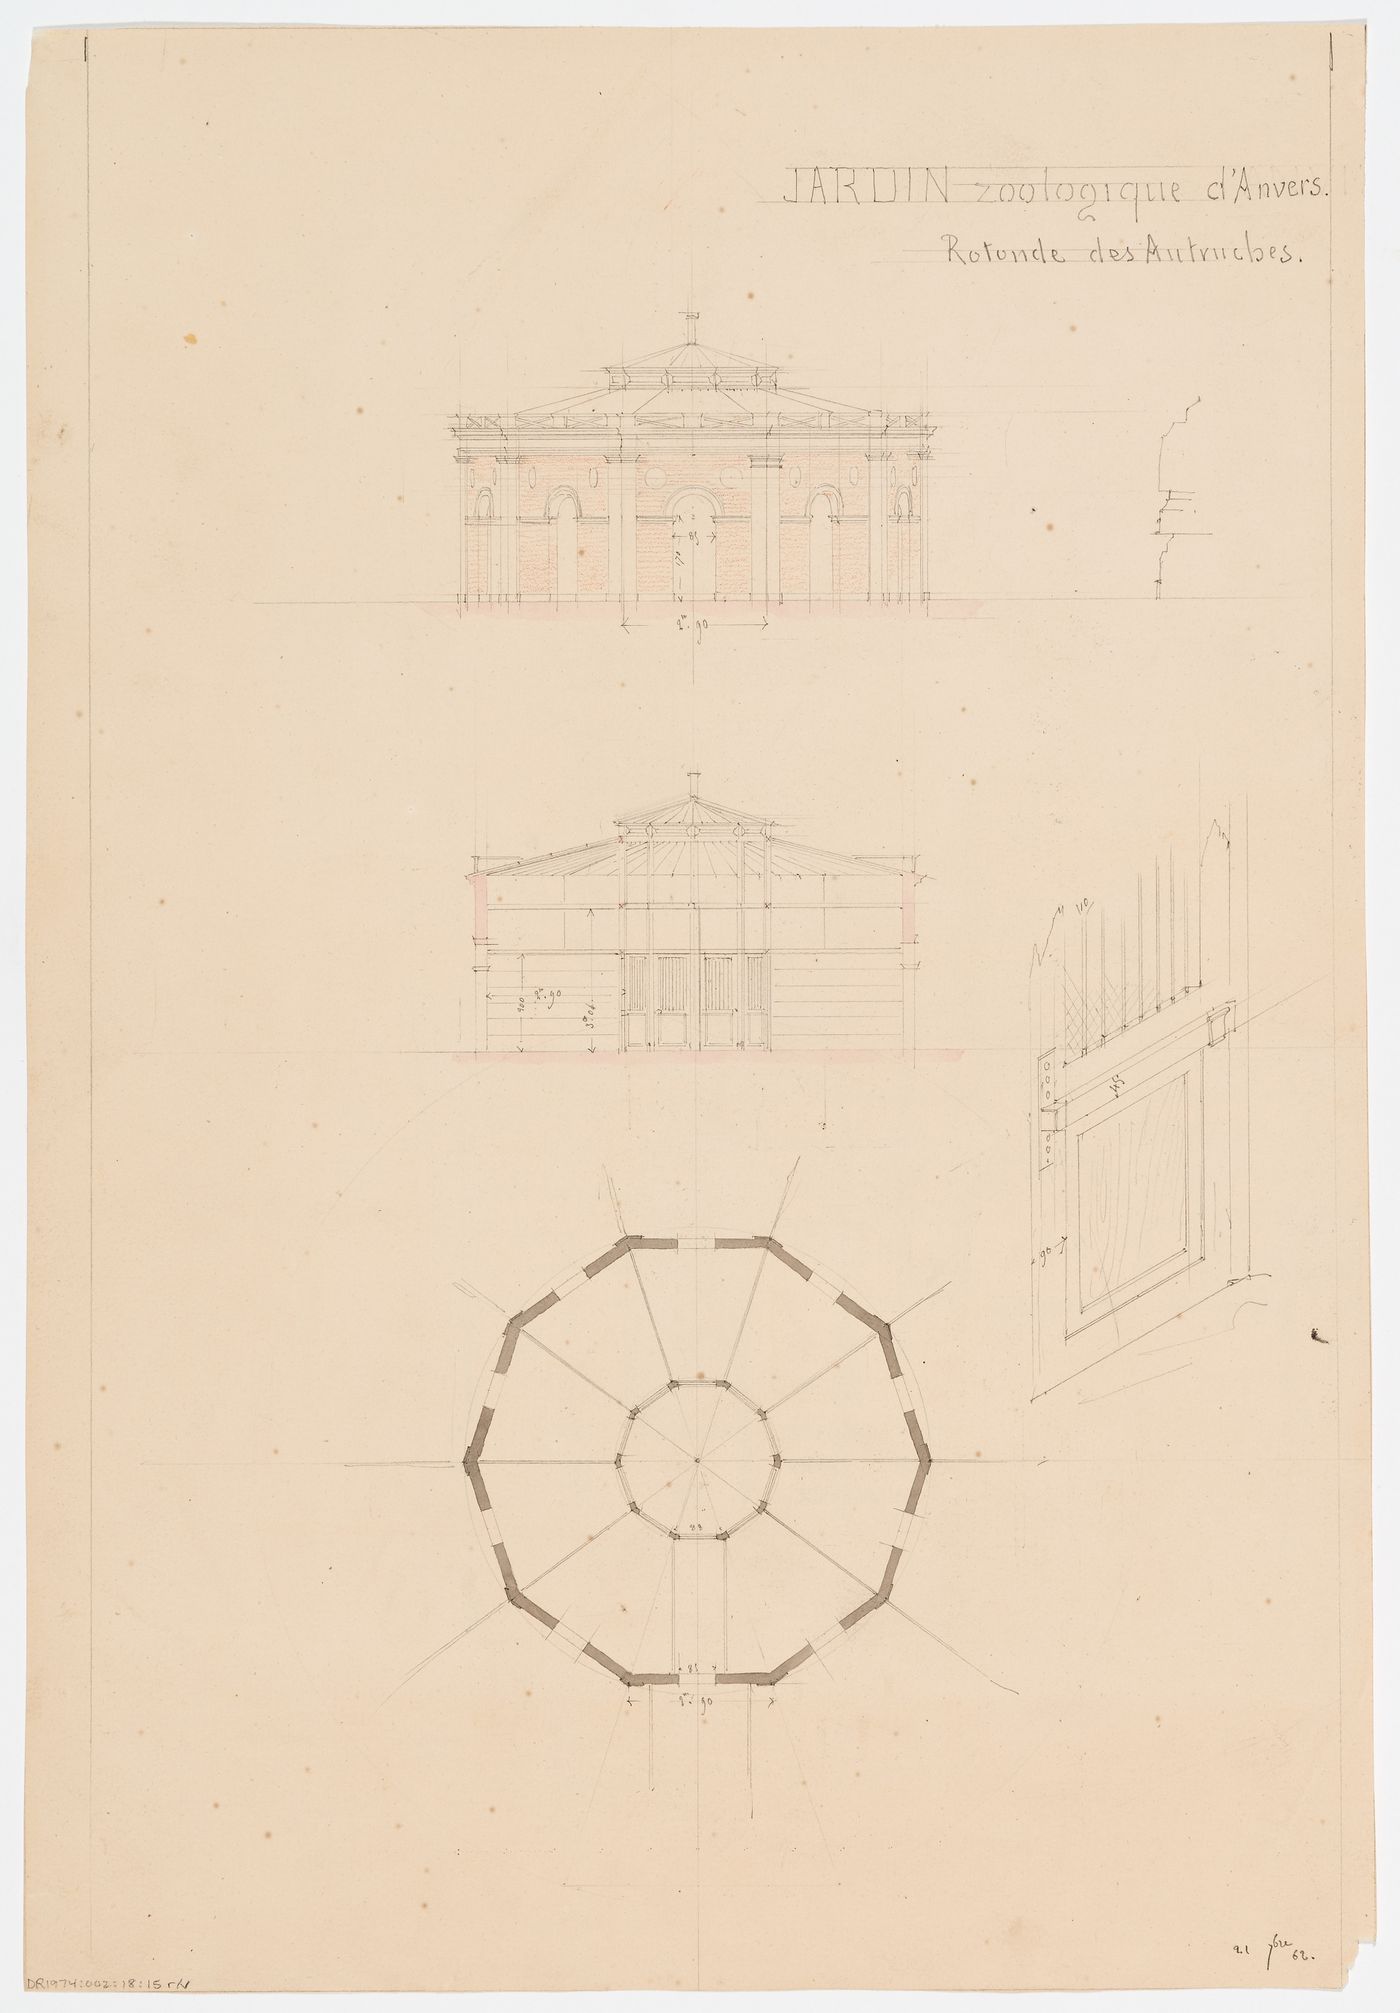 Zoological garden, Antwerp: Elevation, plan, section, and detail of a door of the ostrich aviary